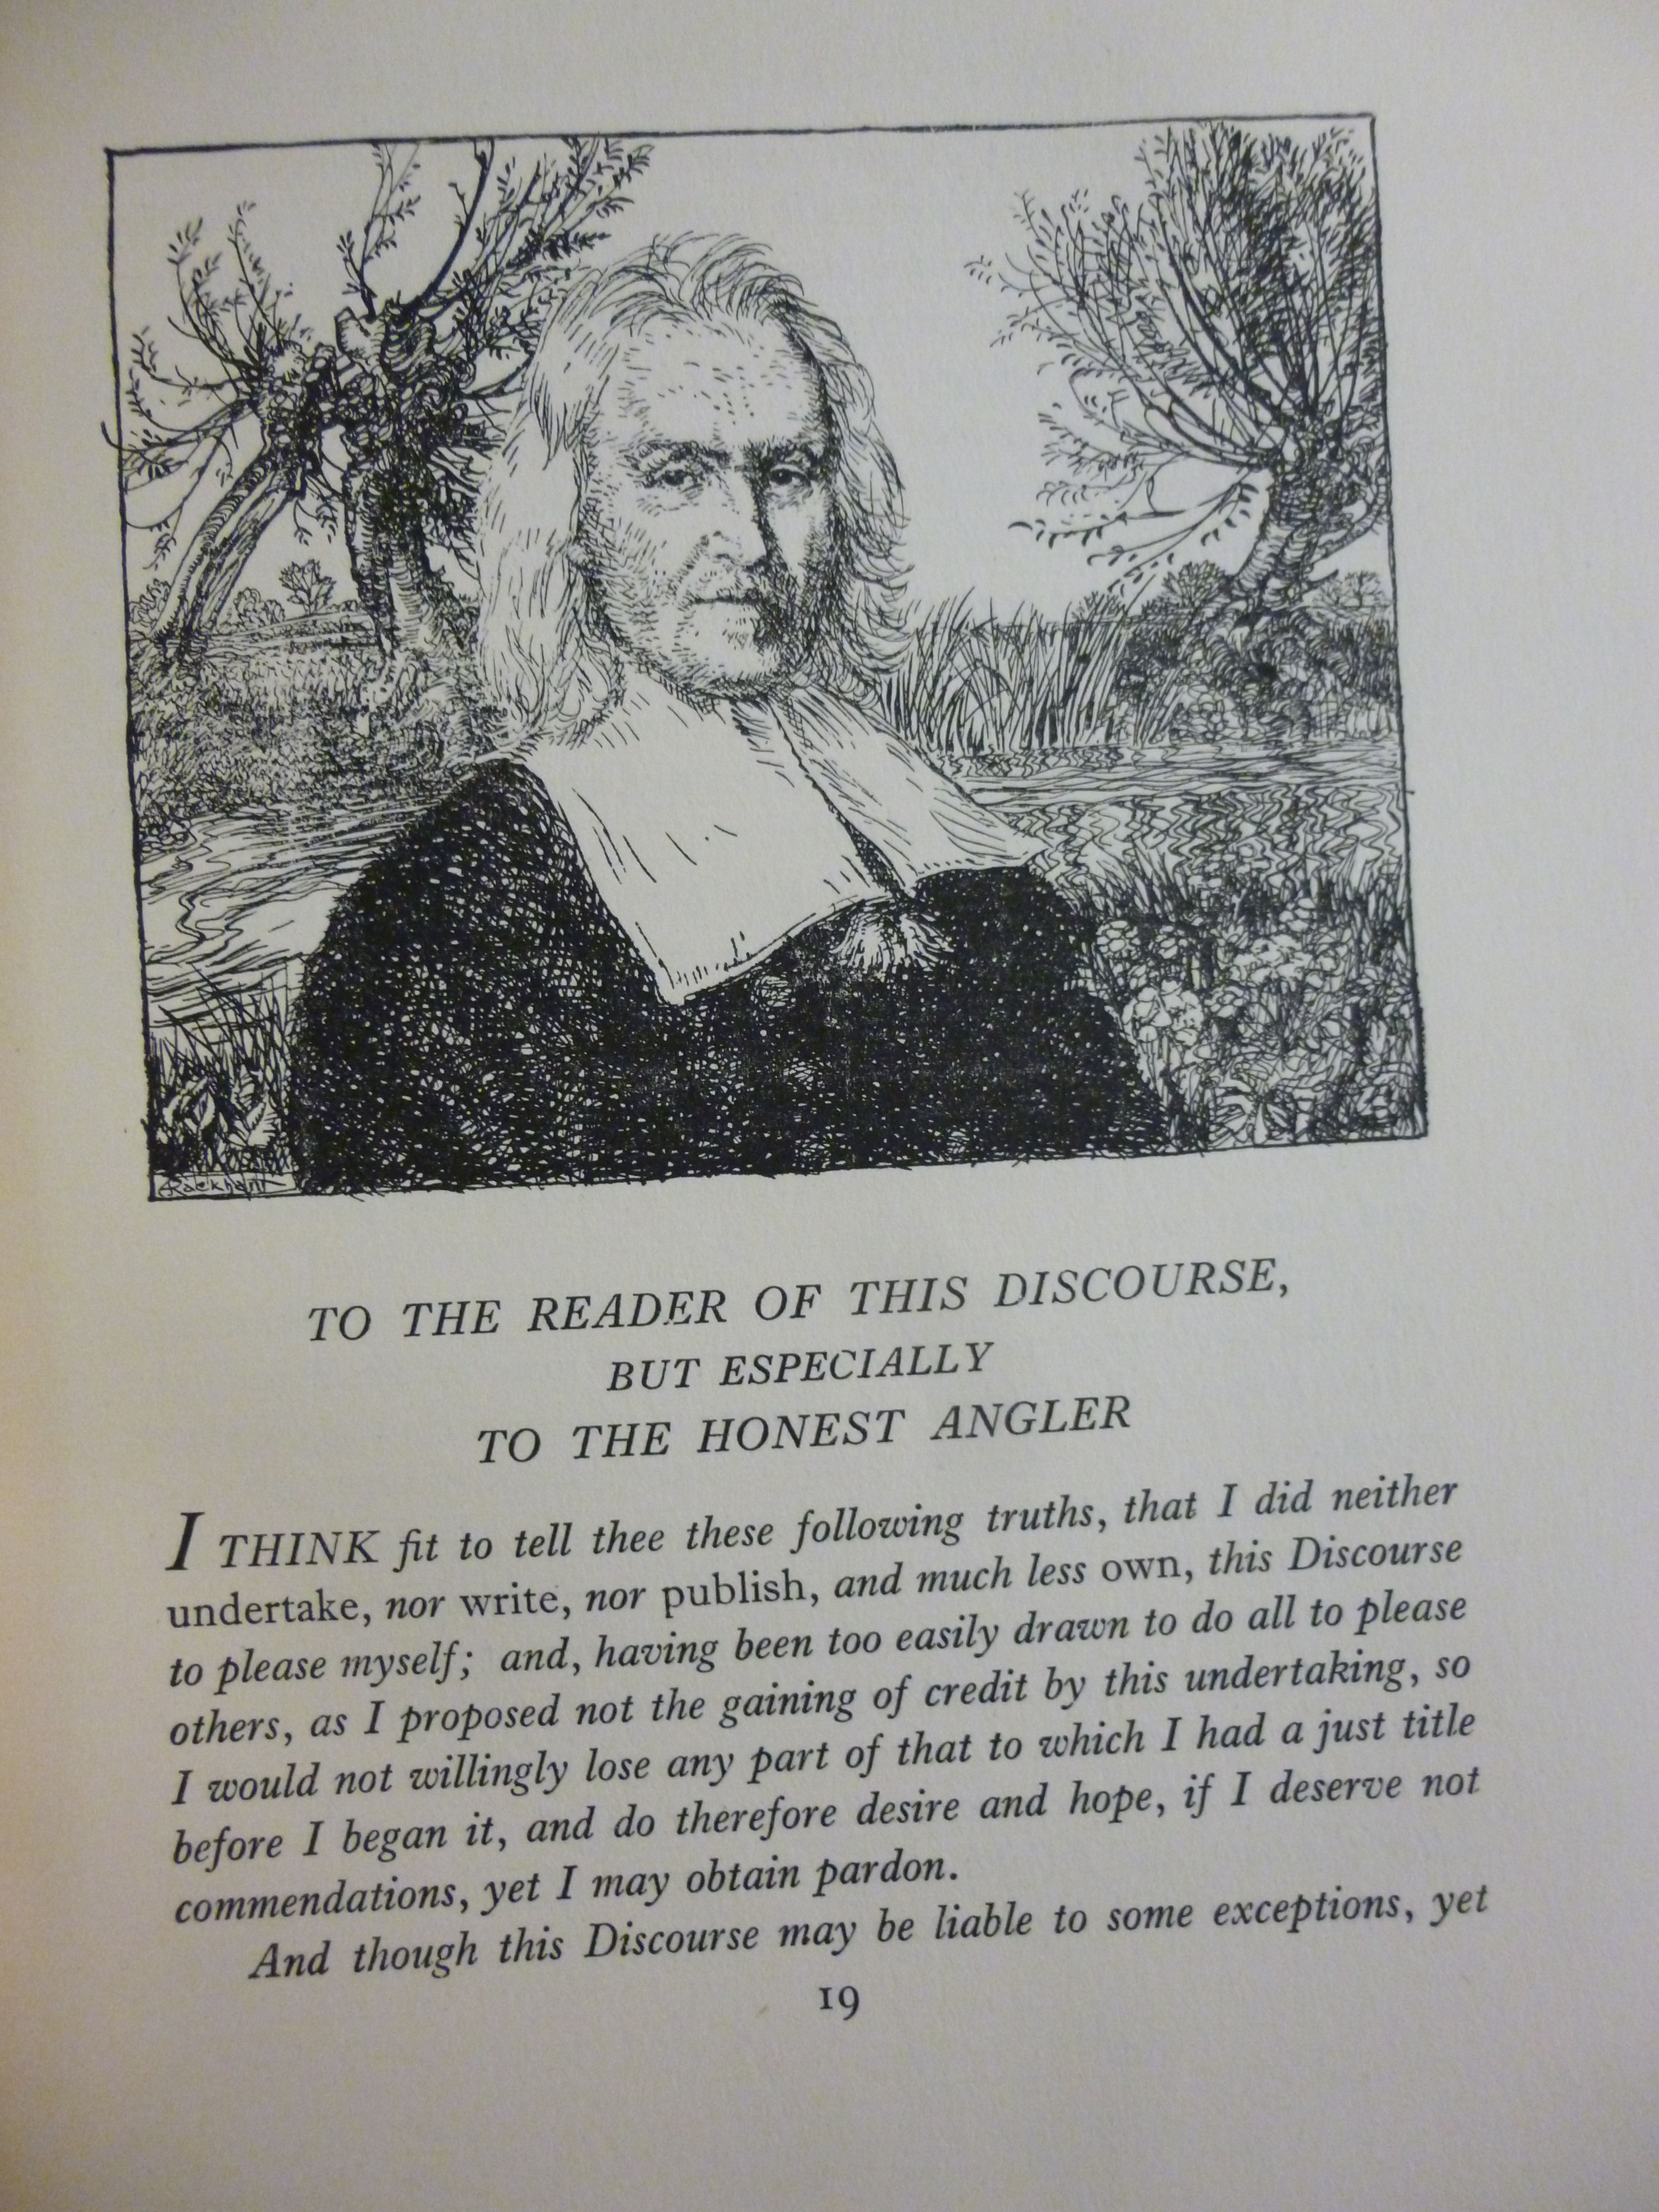 Book: 'The Compleat Angler' by Izaak Wal - Image 6 of 7